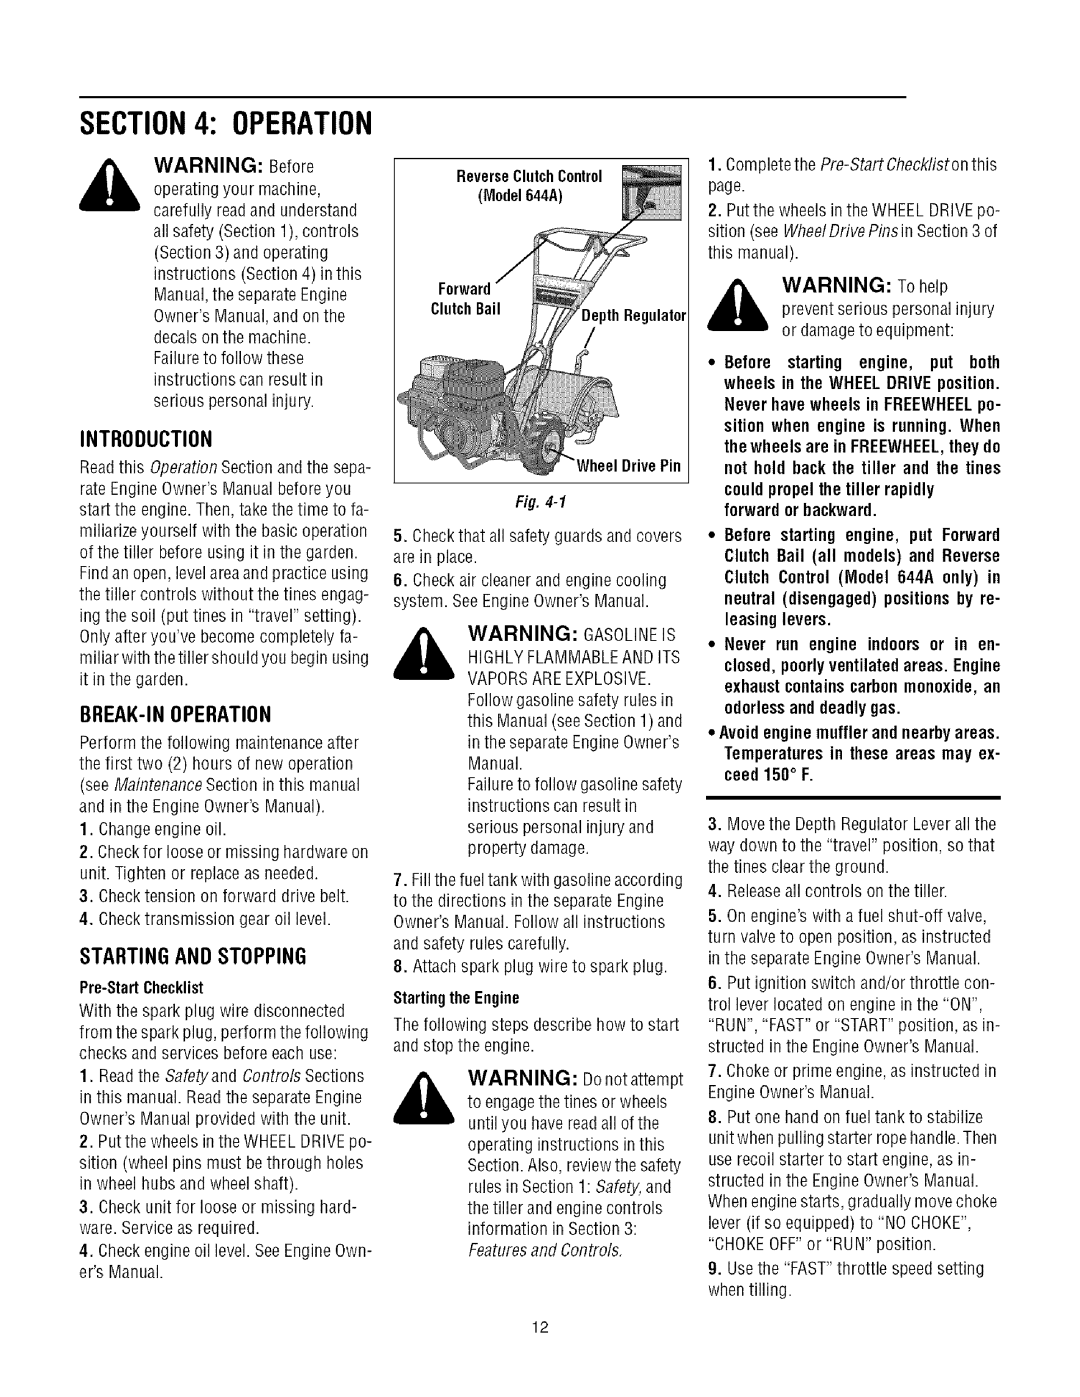 Troy-Bilt 644A, 640C Operation, Break-Inoperation, Starting And Stopping, WARNING Donot attempt, WARNING To help, Arning 